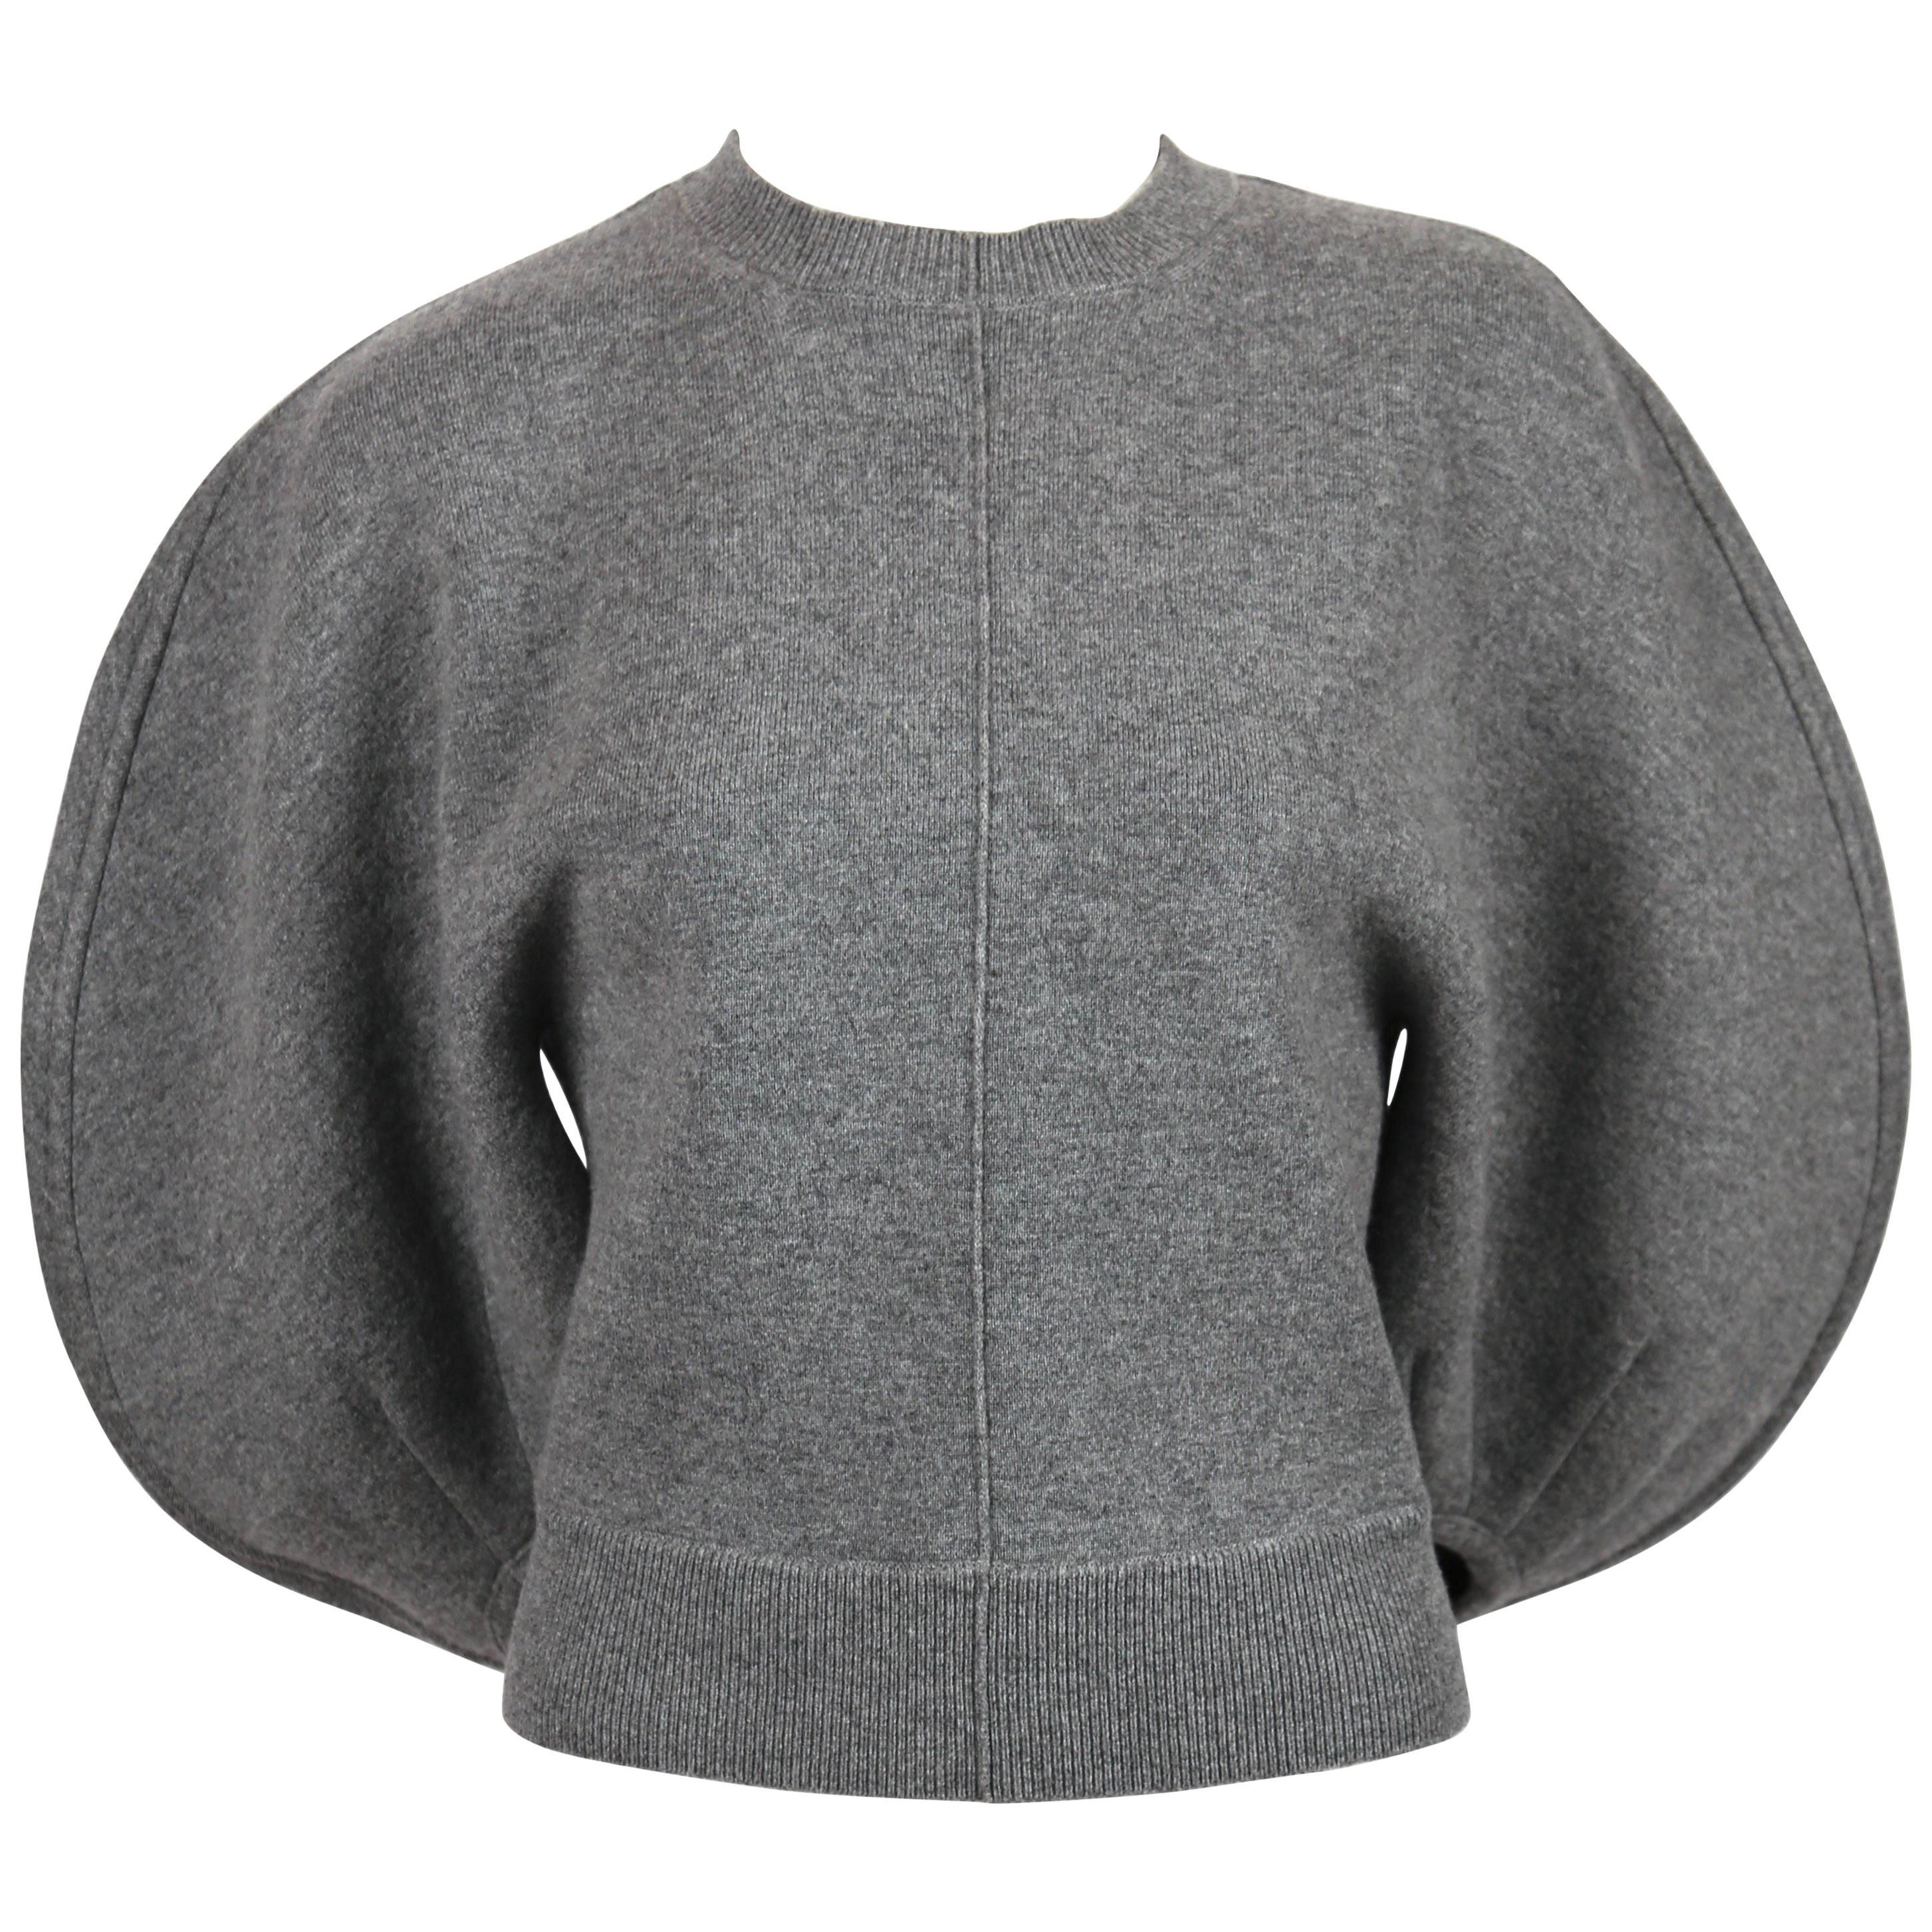 CELINE by PHOEBE PHILO charcoal grey sweater with rounded sleeves